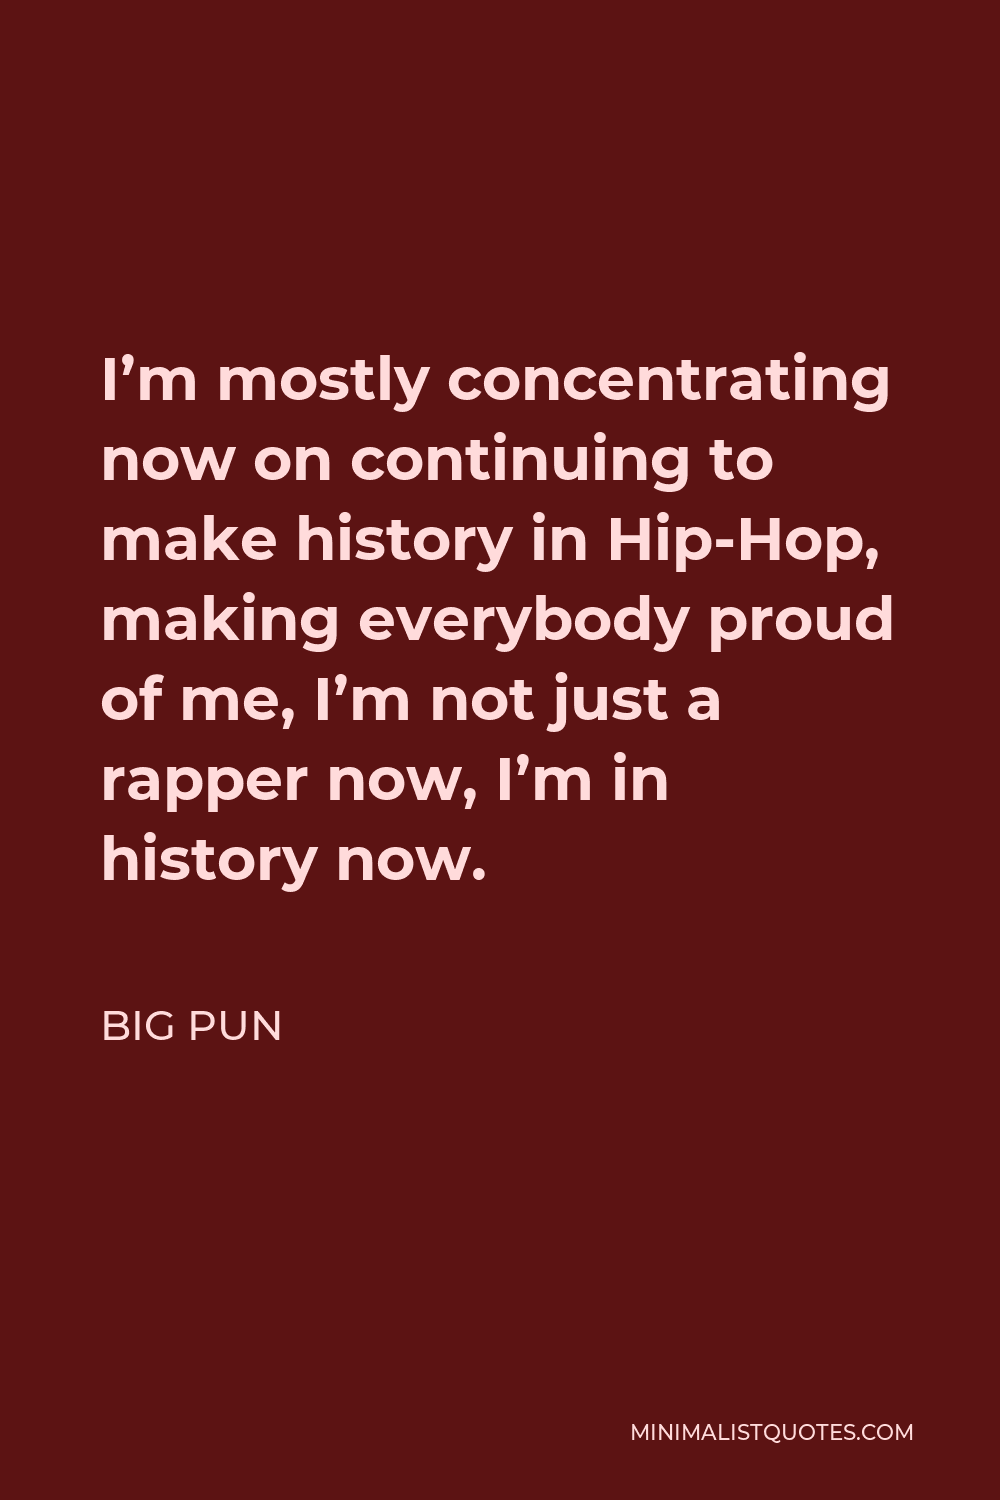 Big Pun Quote - I’m mostly concentrating now on continuing to make history in Hip-Hop, making everybody proud of me, I’m not just a rapper now, I’m in history now.